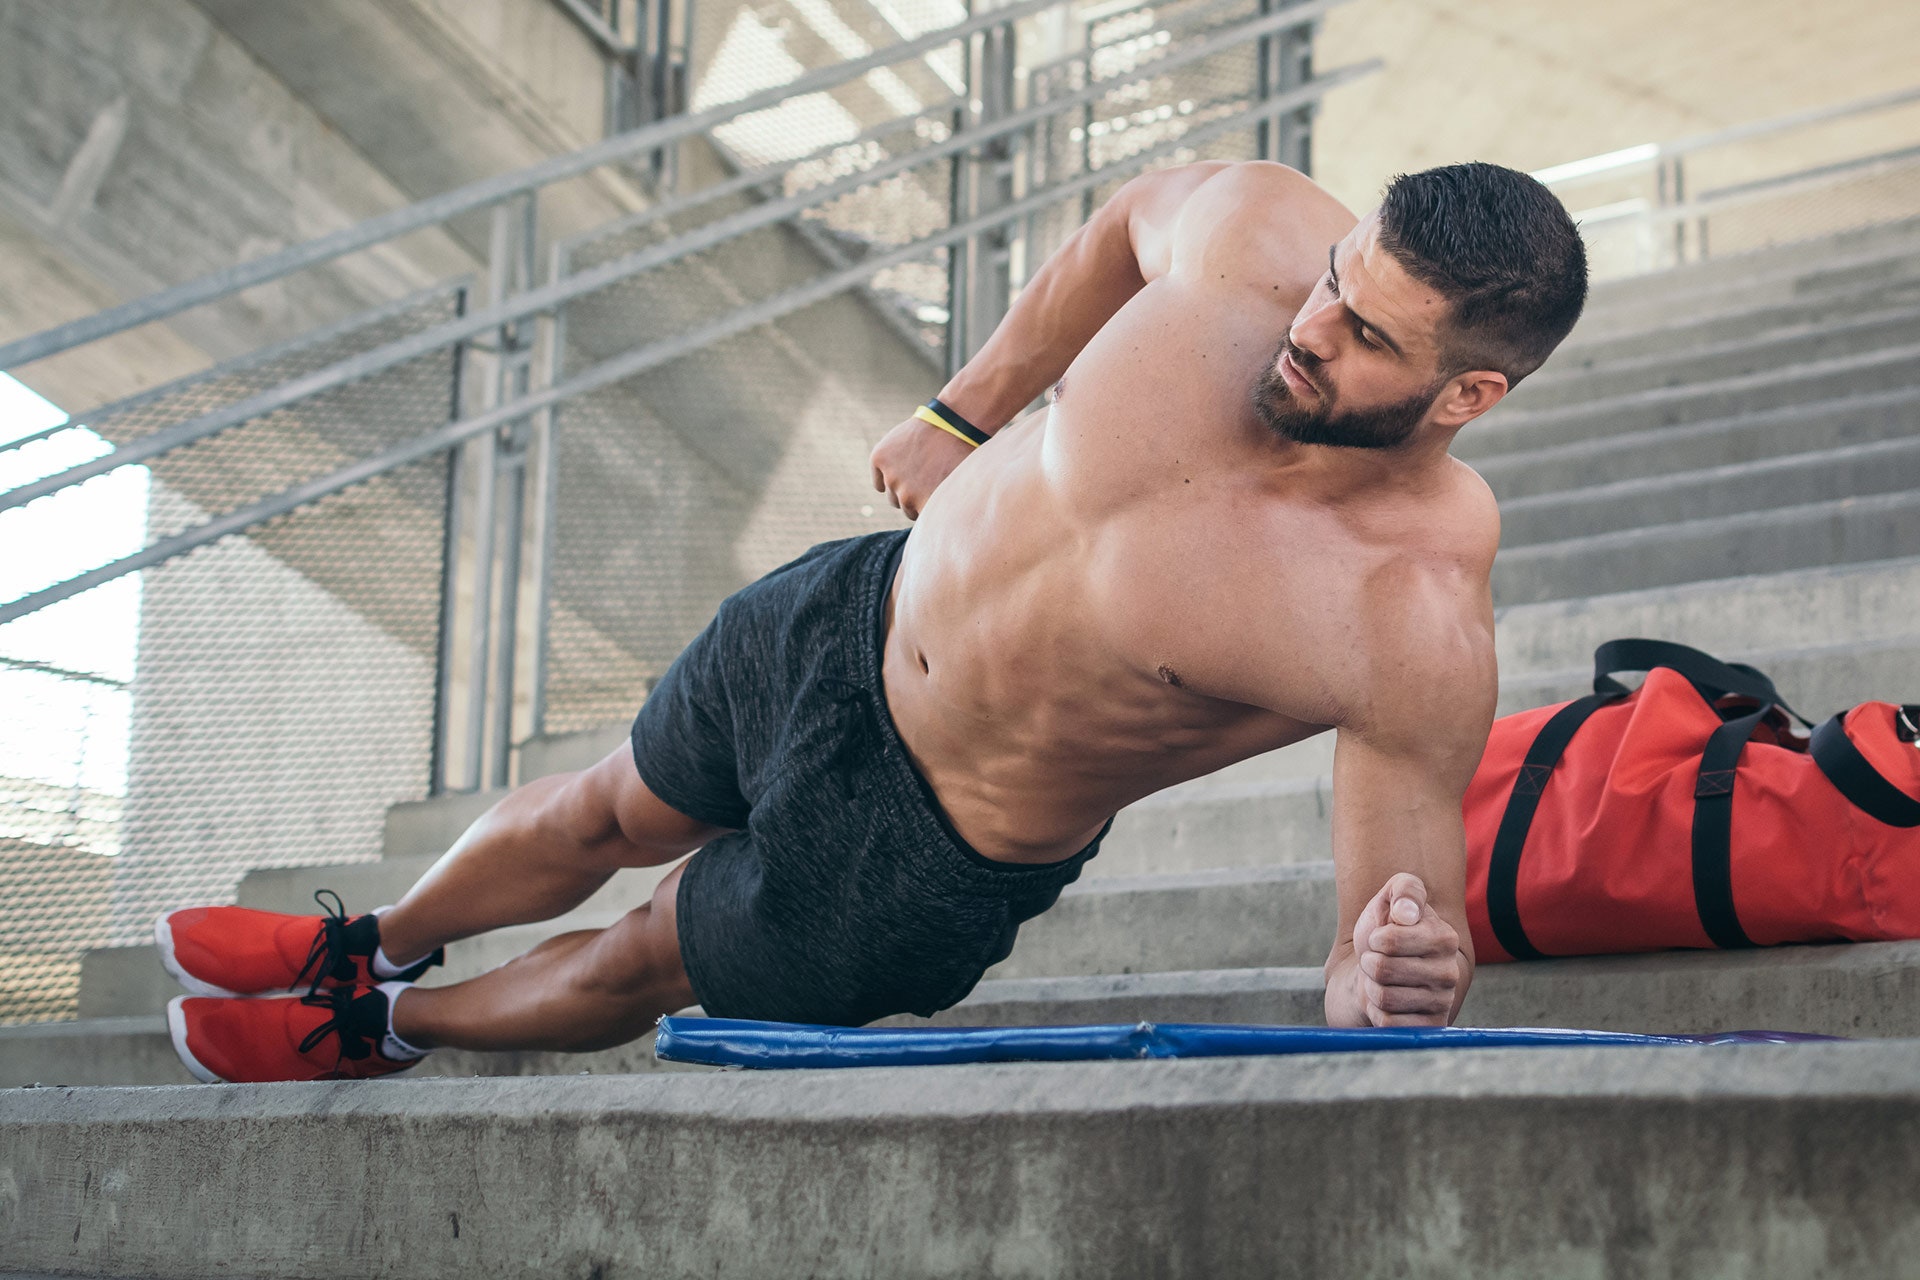 Six underrated exercises that could revolutionize your workouts